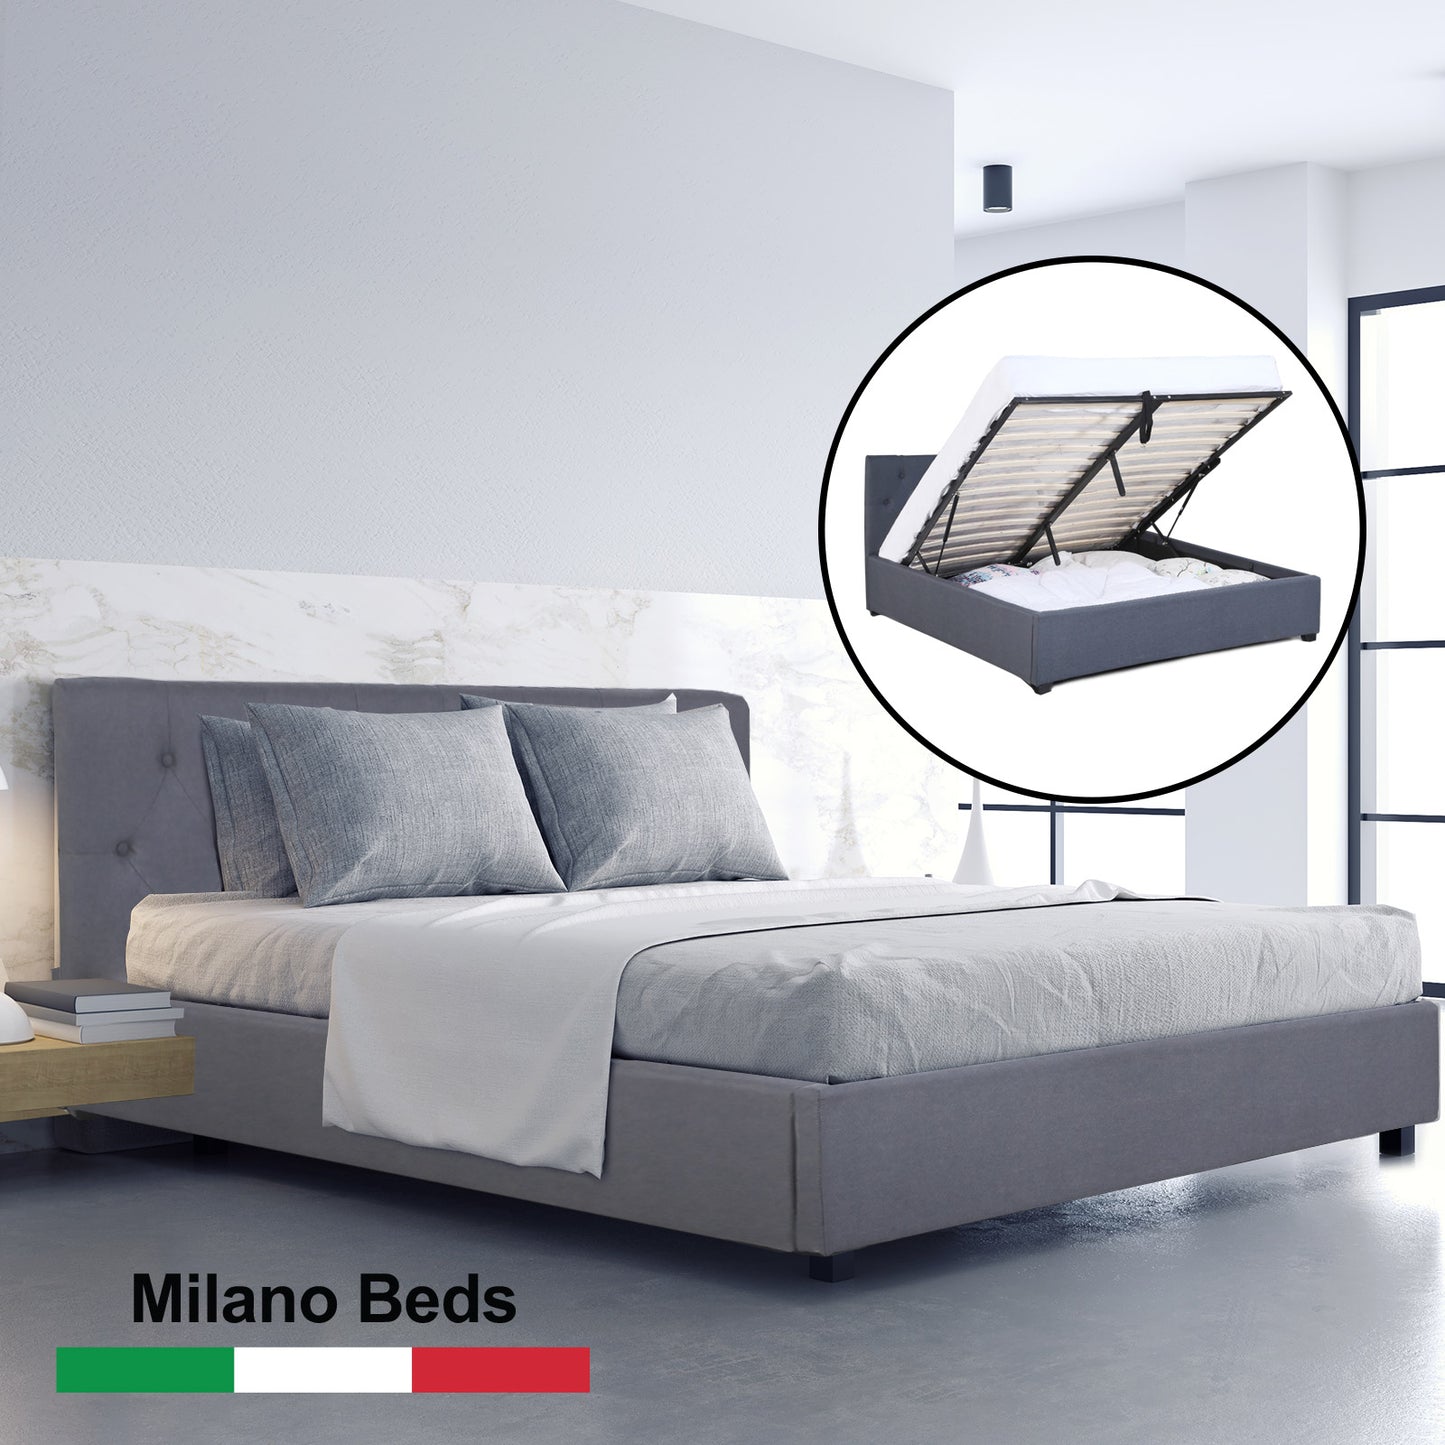 Milano Capri Luxury Gas Lift Bed Frame Base And Headboard With Storage - Single - Charcoal